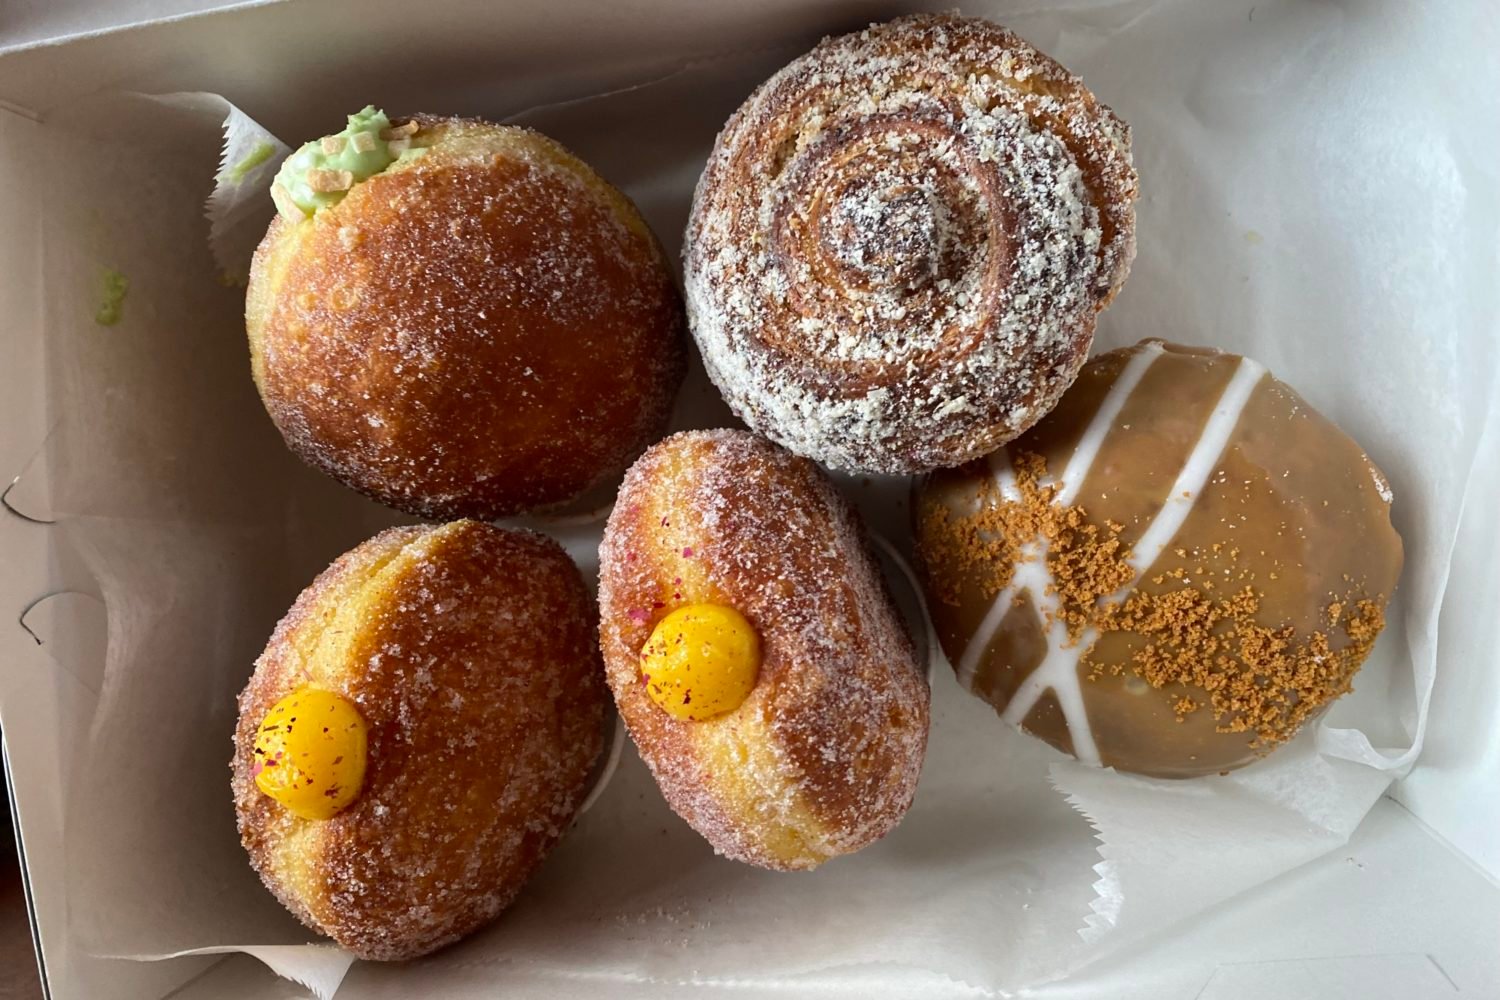 Assorted doughnuts and pastries from Rose Ave. Bakery. Photo by Sami Gruhin.